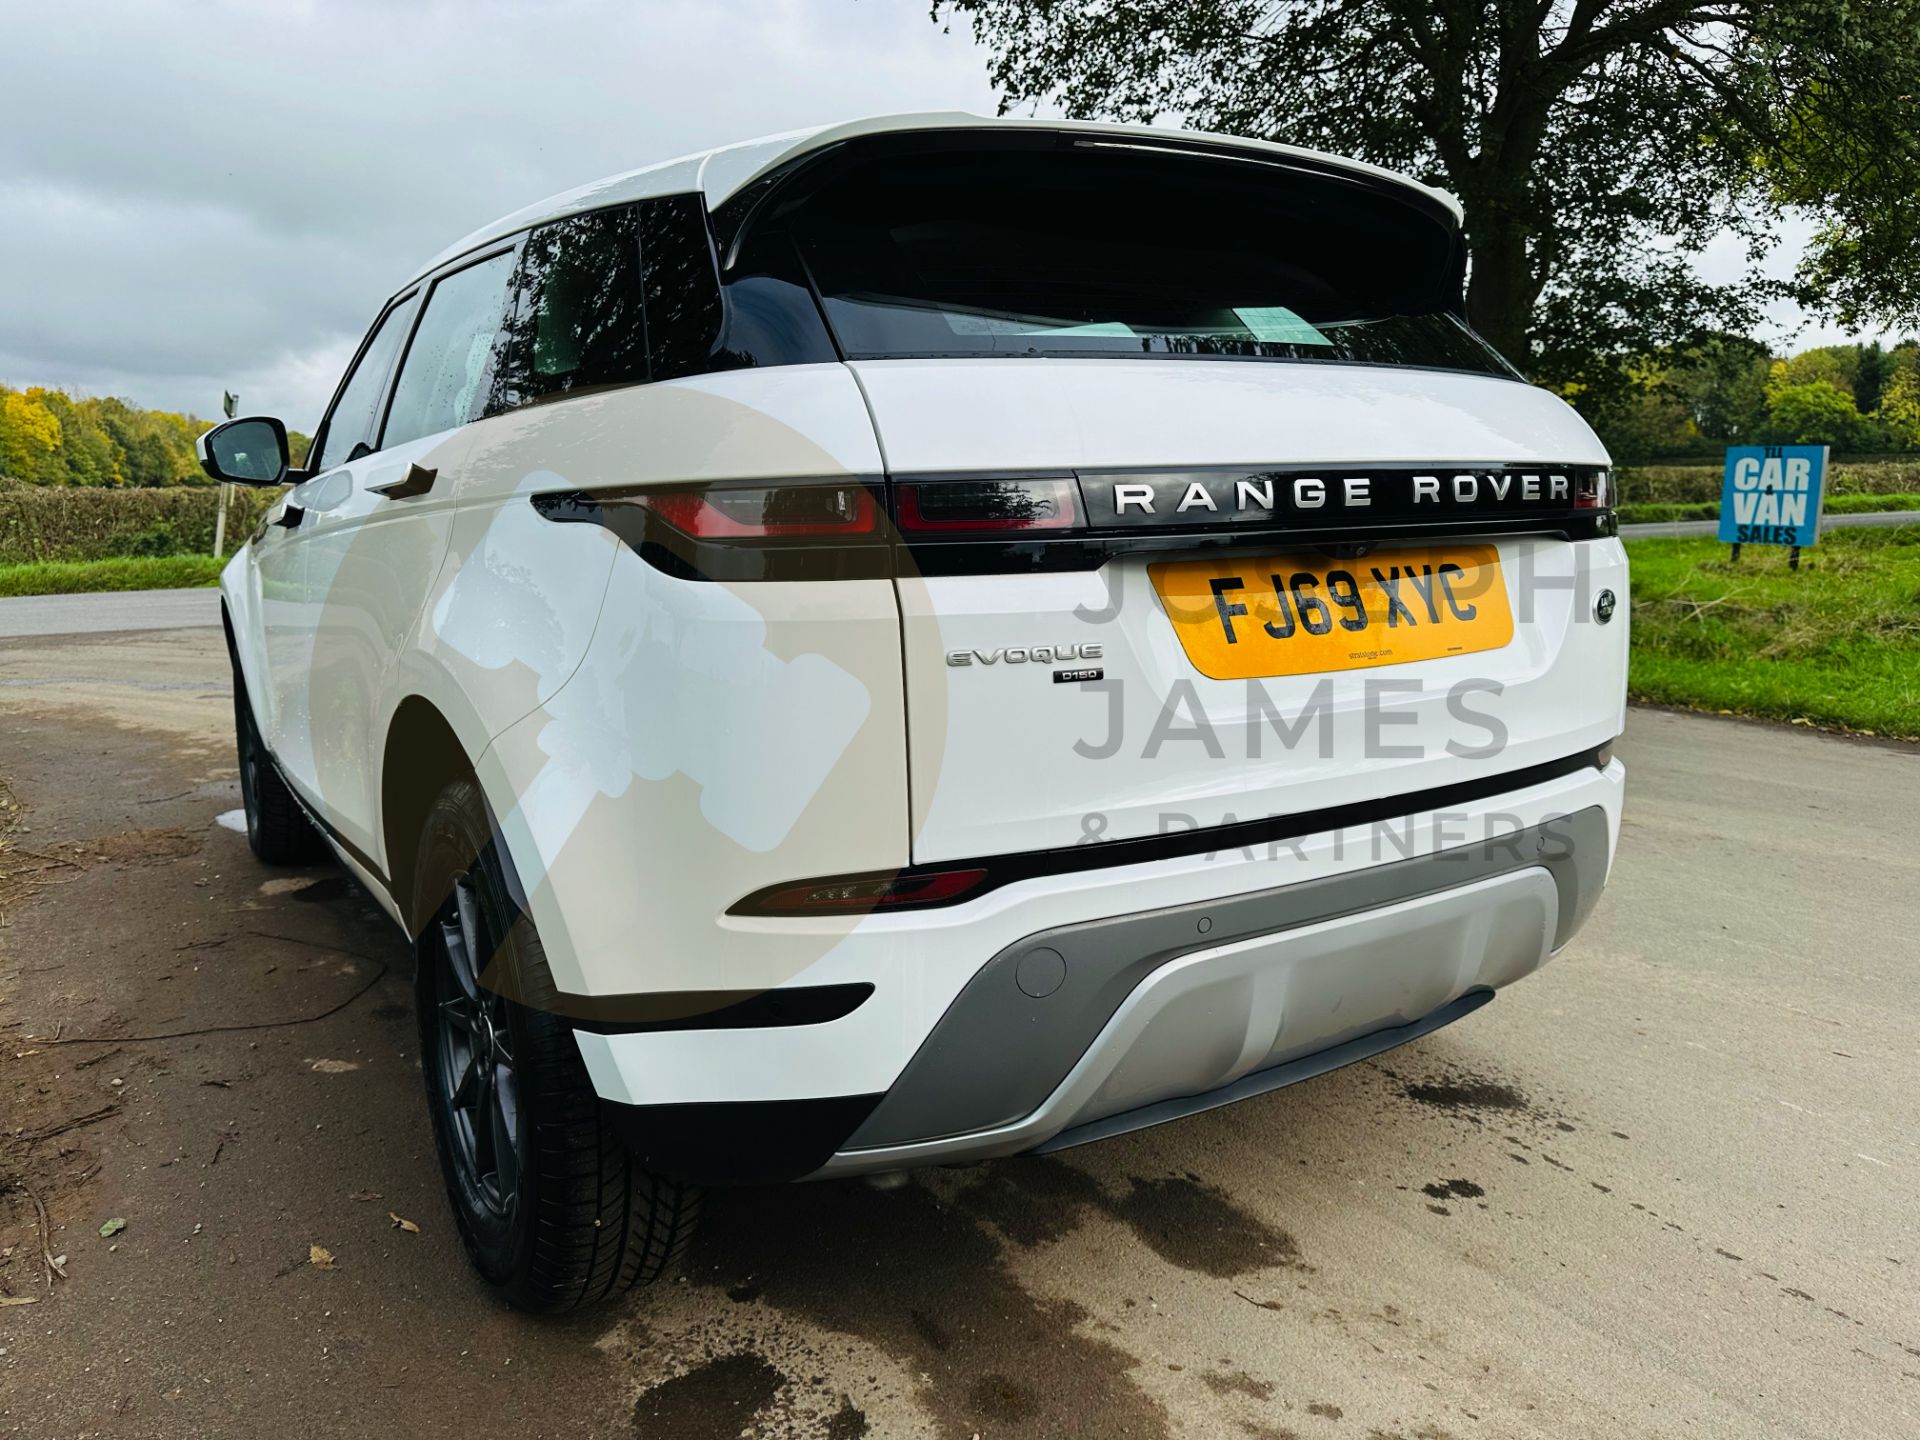 (ON SALE) LAND ROVER RANGE ROVER EVOQUE 2.0d AUTO-START STOP (2020 MODEL) ONLY 33K MILES FROM NEW - Image 11 of 41